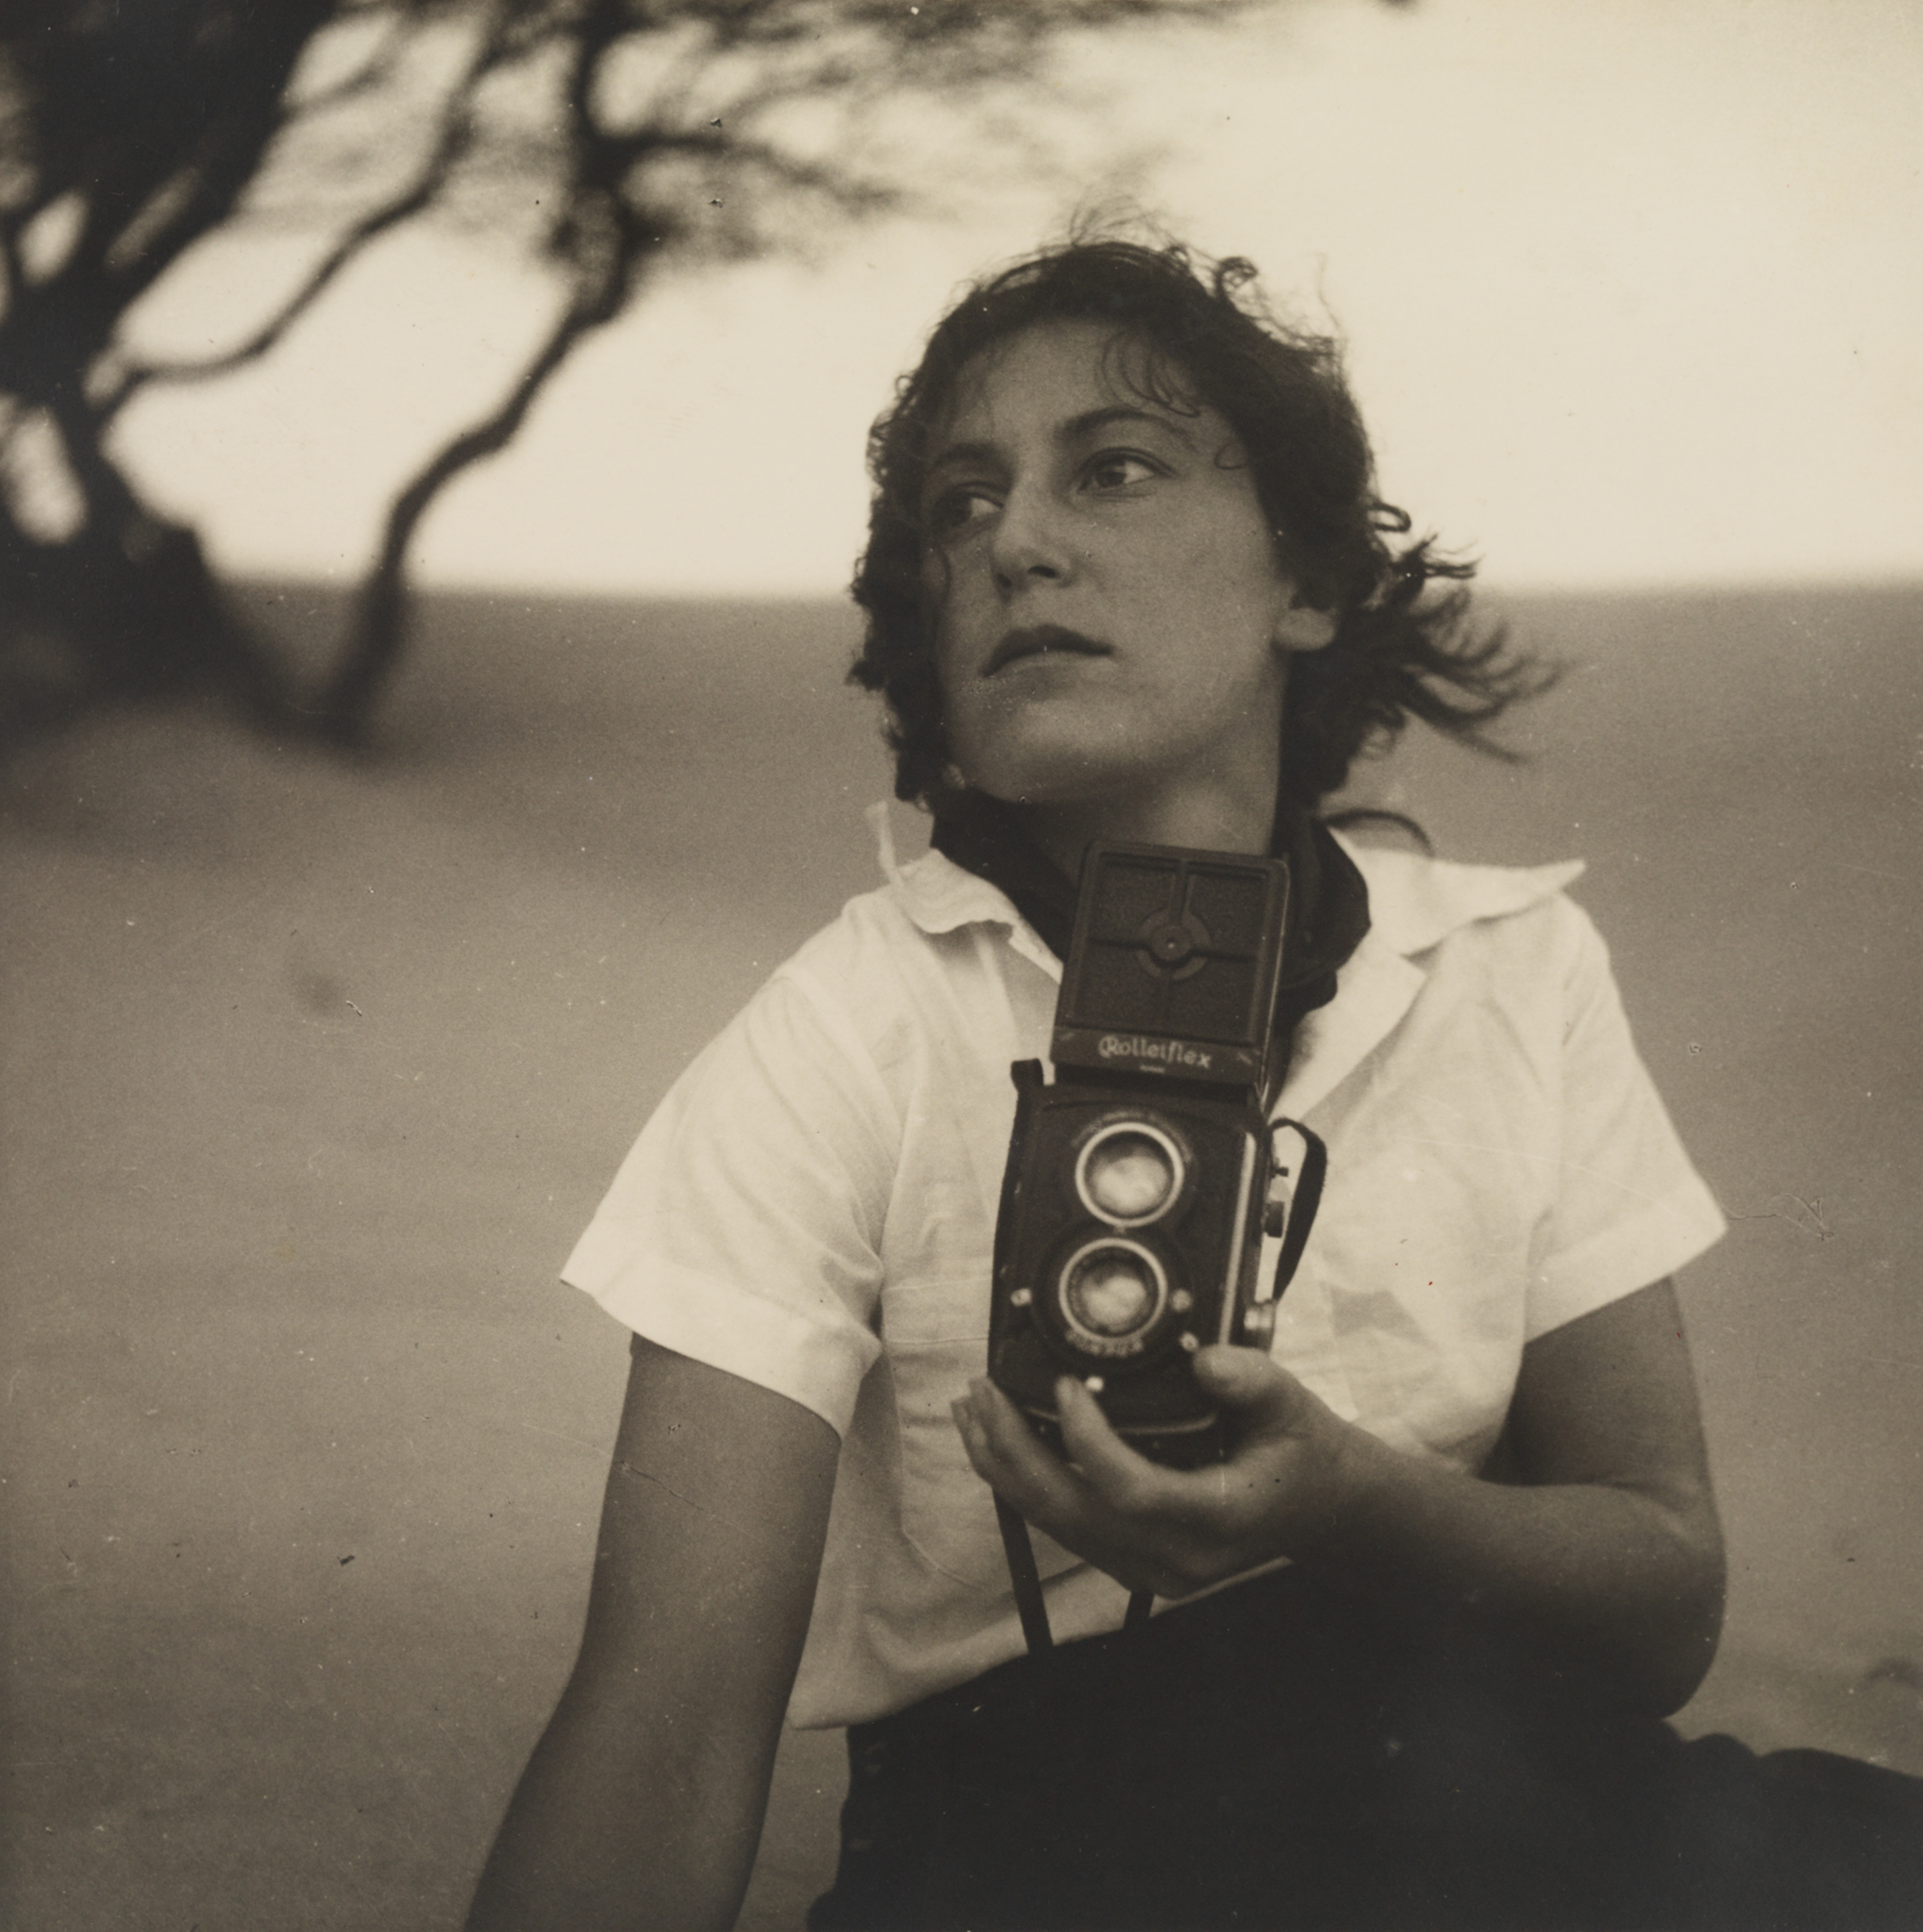  A sepia photographic portrait of a woman sitting on a beach gazing off to the size, holding an old camera up in front of her